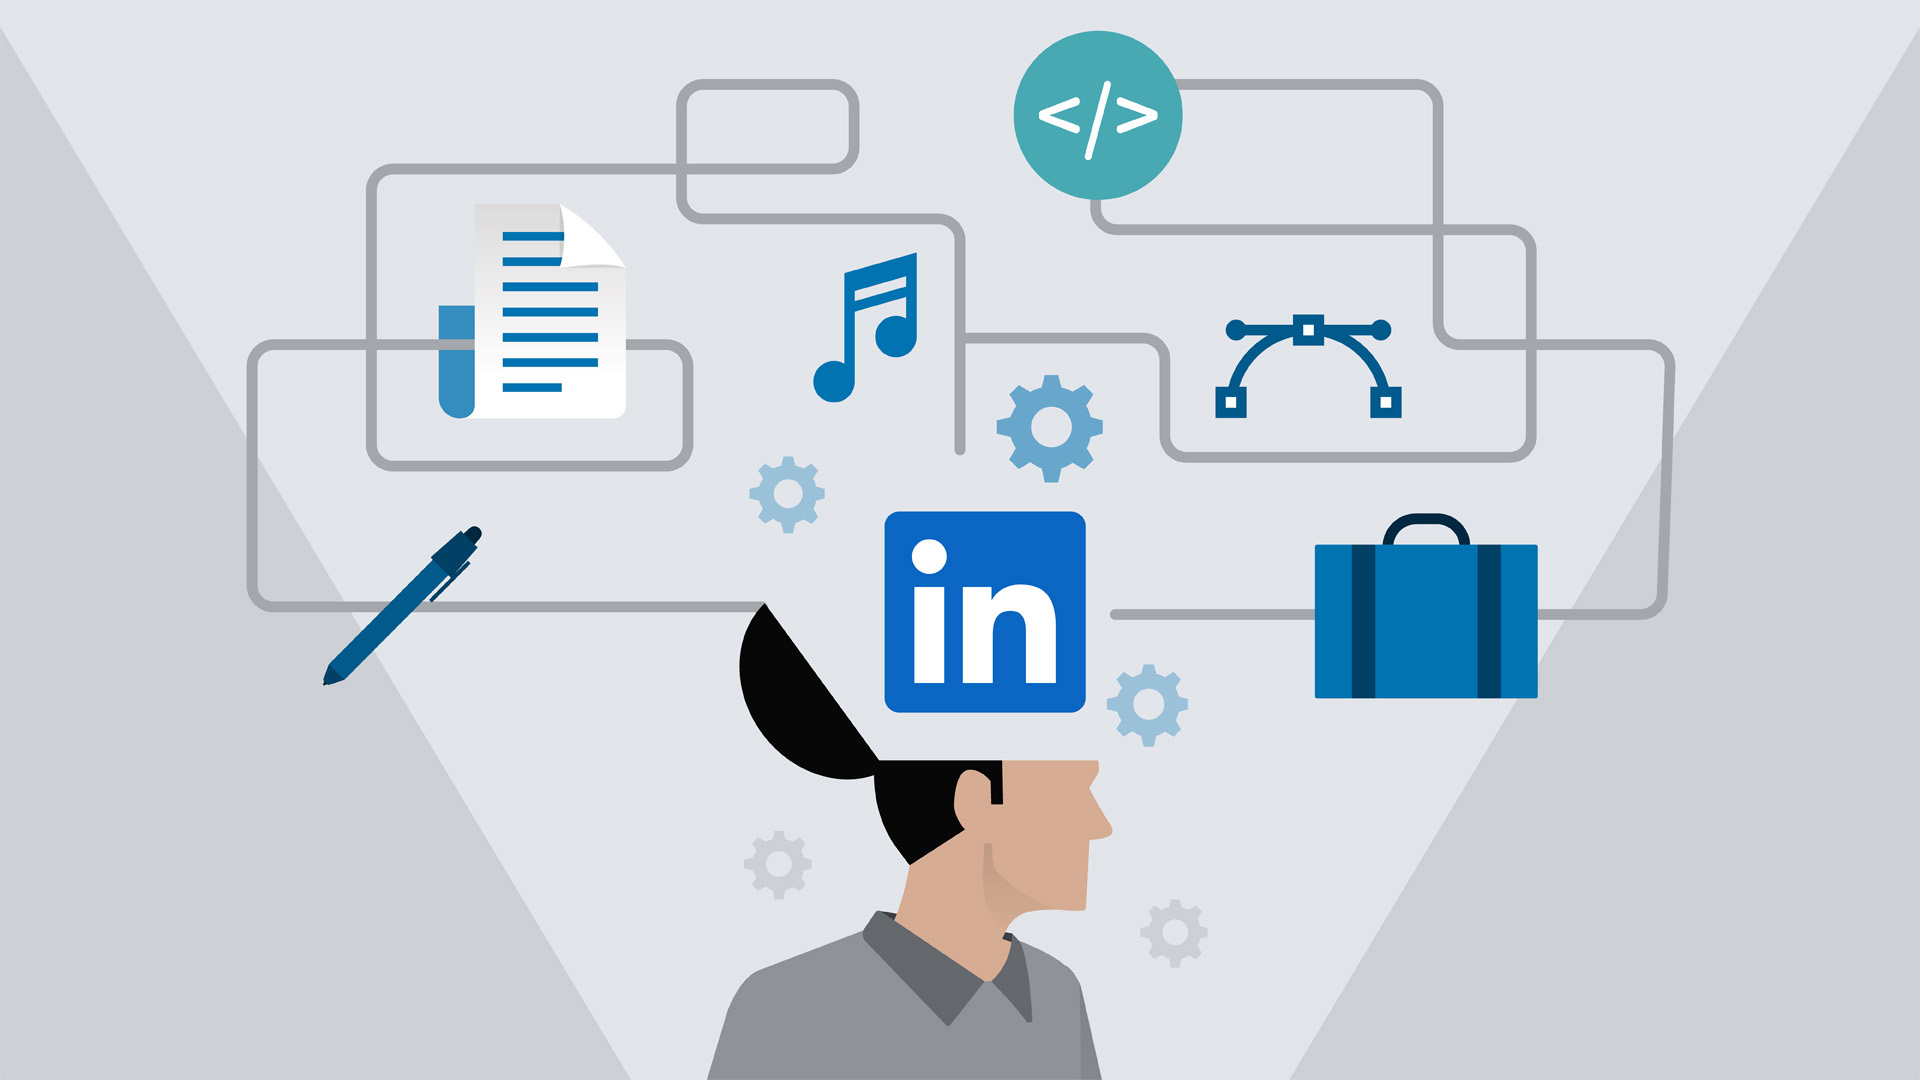 Illustration of a man with his head opening to gears, documents, and other icons that represent linkedin learning concepts.